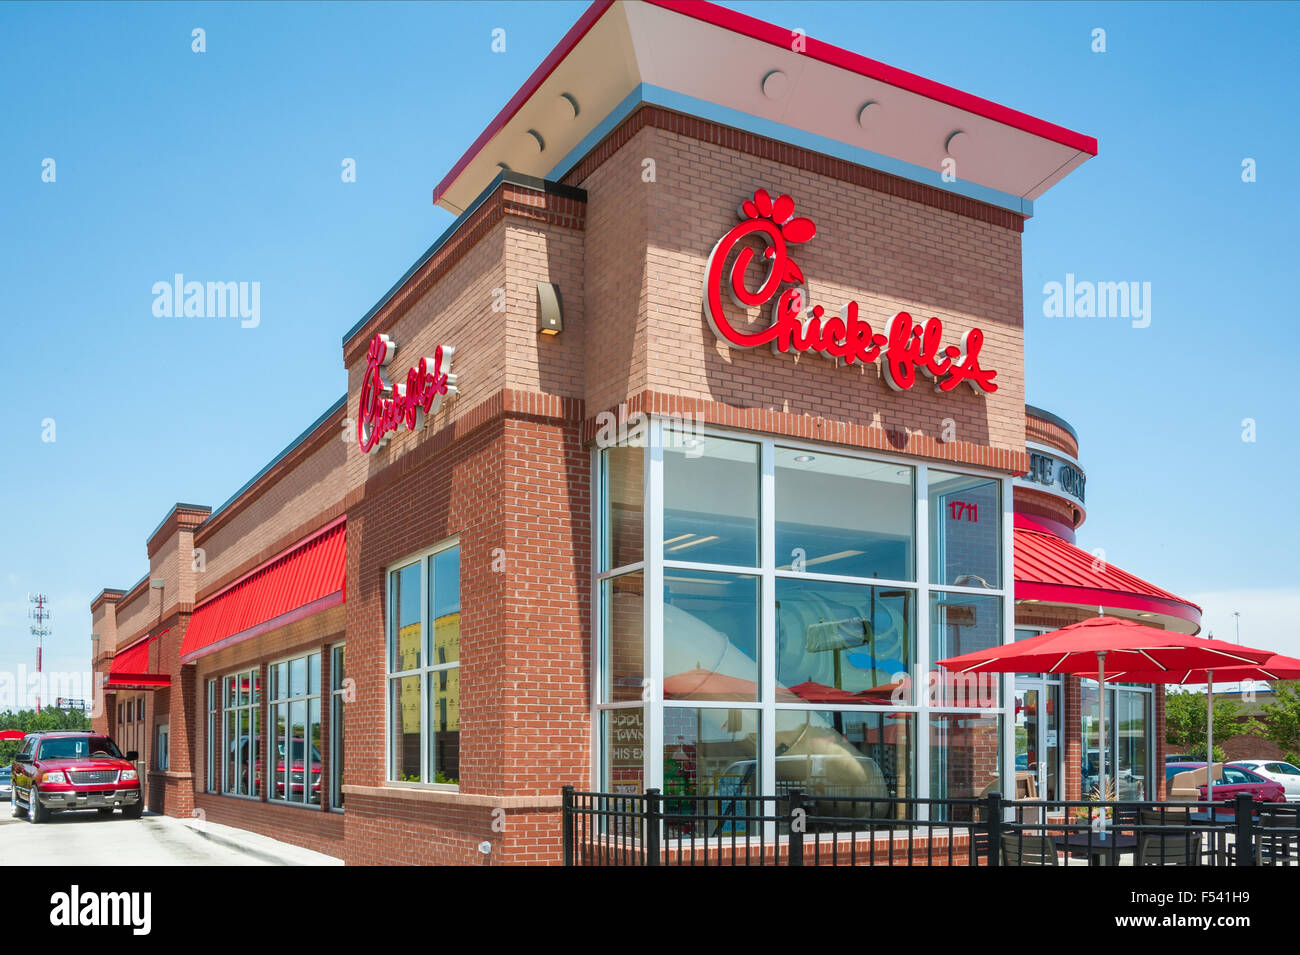 Chick-fil-A is America's top rated fast food chain, known for its Chicken Sandwiches, southern hospitality and Christian values. Stock Photo